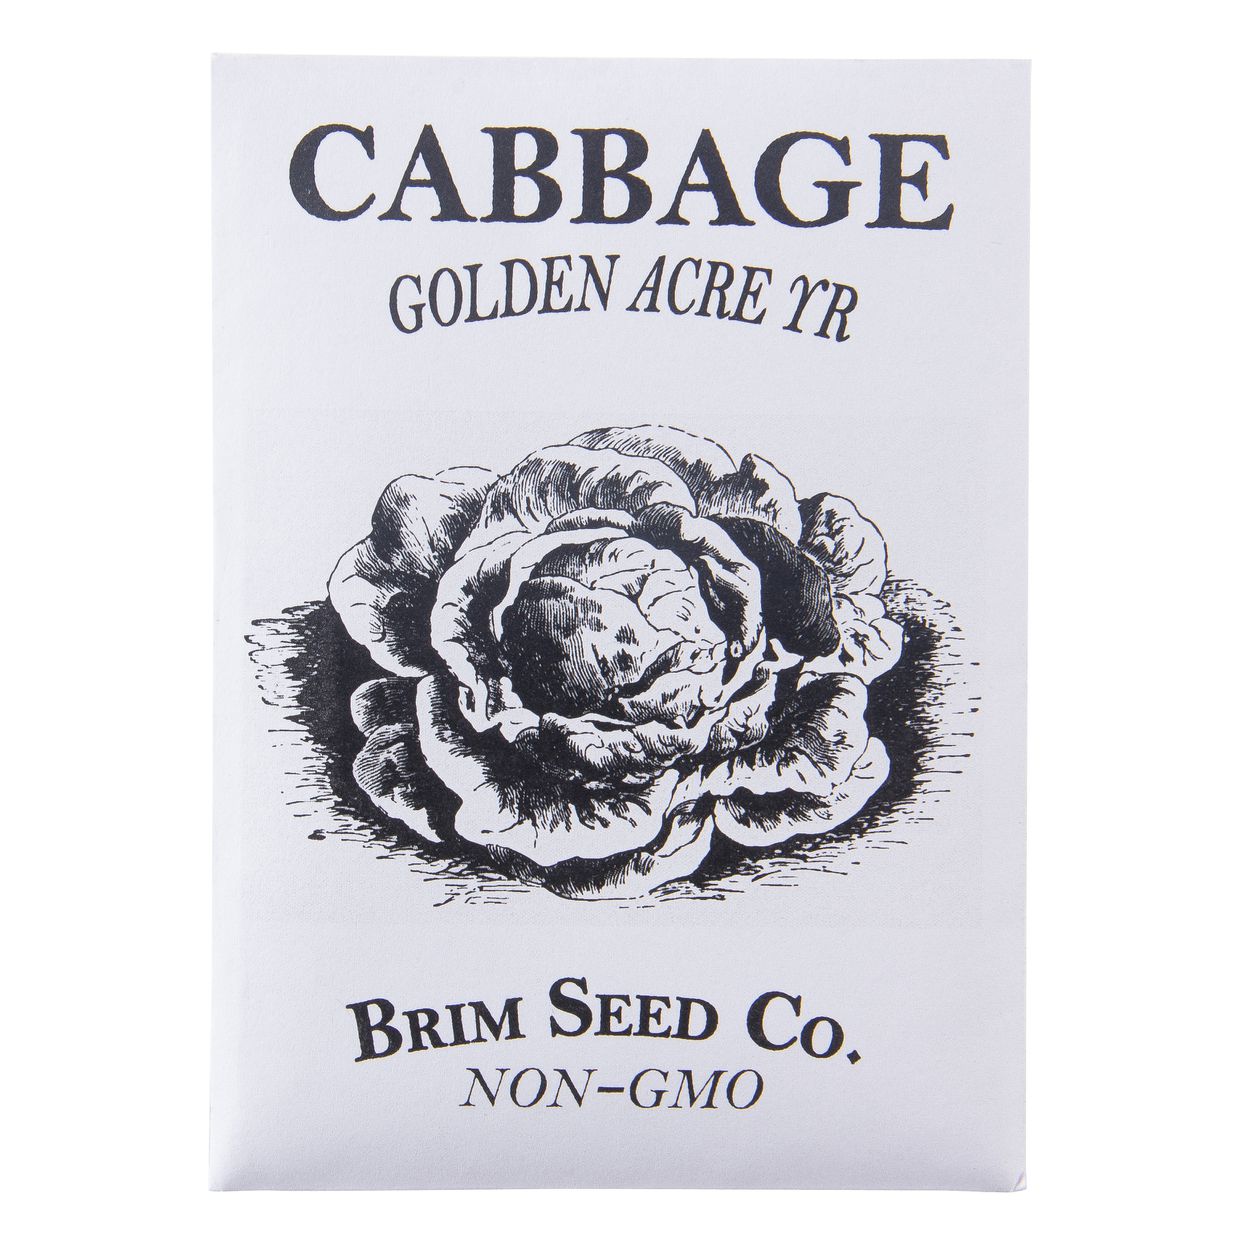 Brim Seed Co. - Golden Acre YR Cabbage Seed